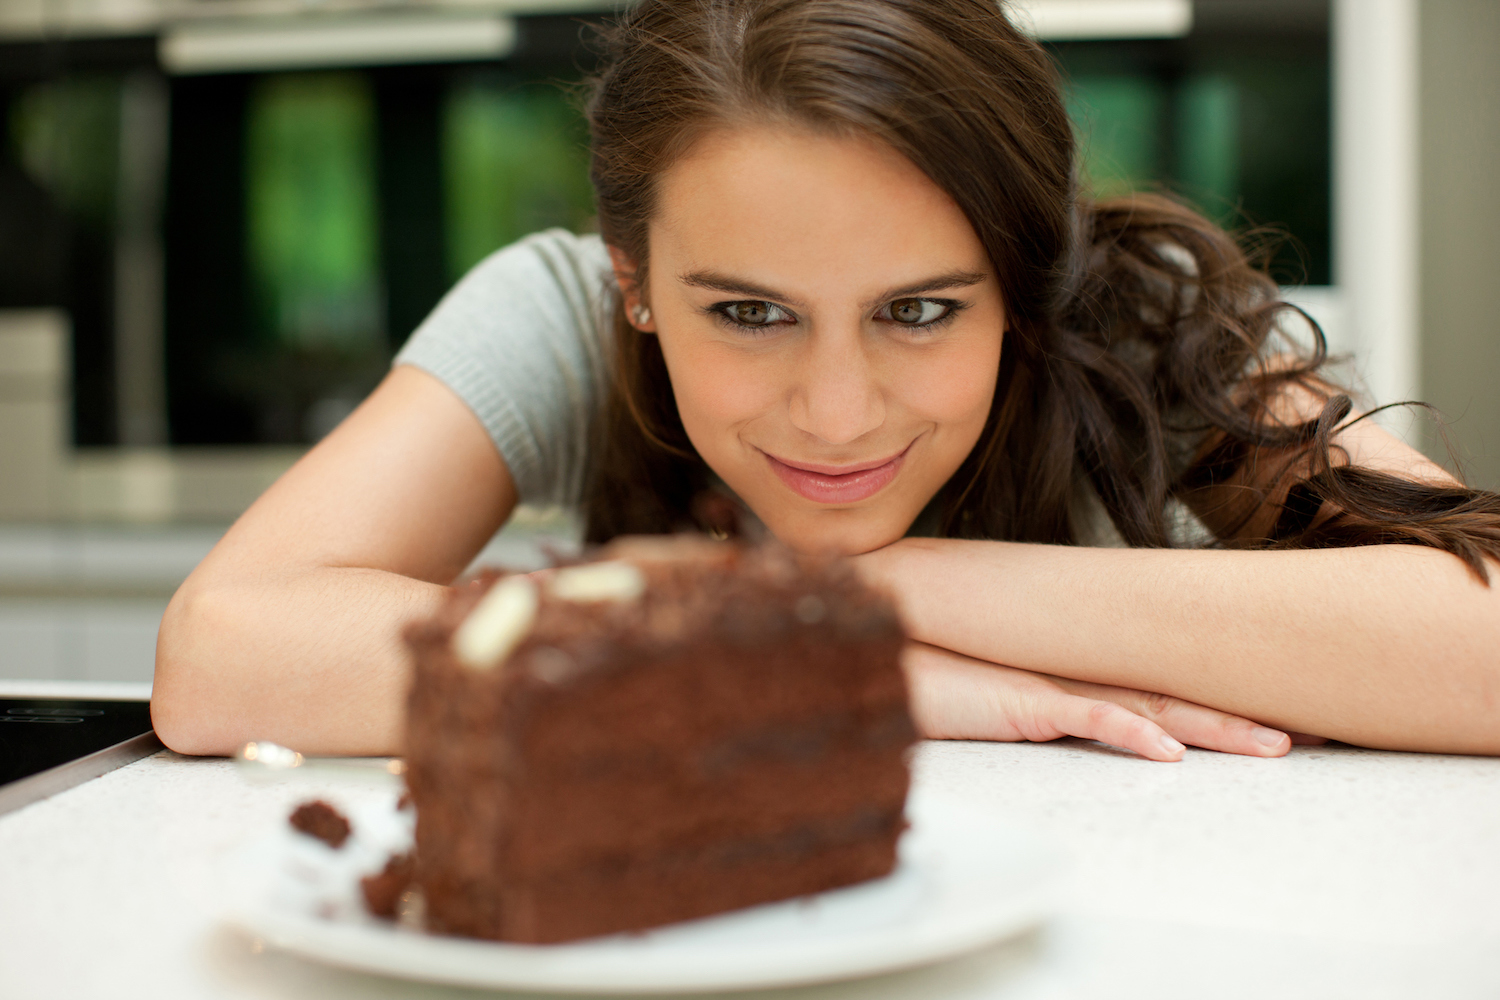 This Simple Trick Can Help You Stop Stress Eating, Study Says